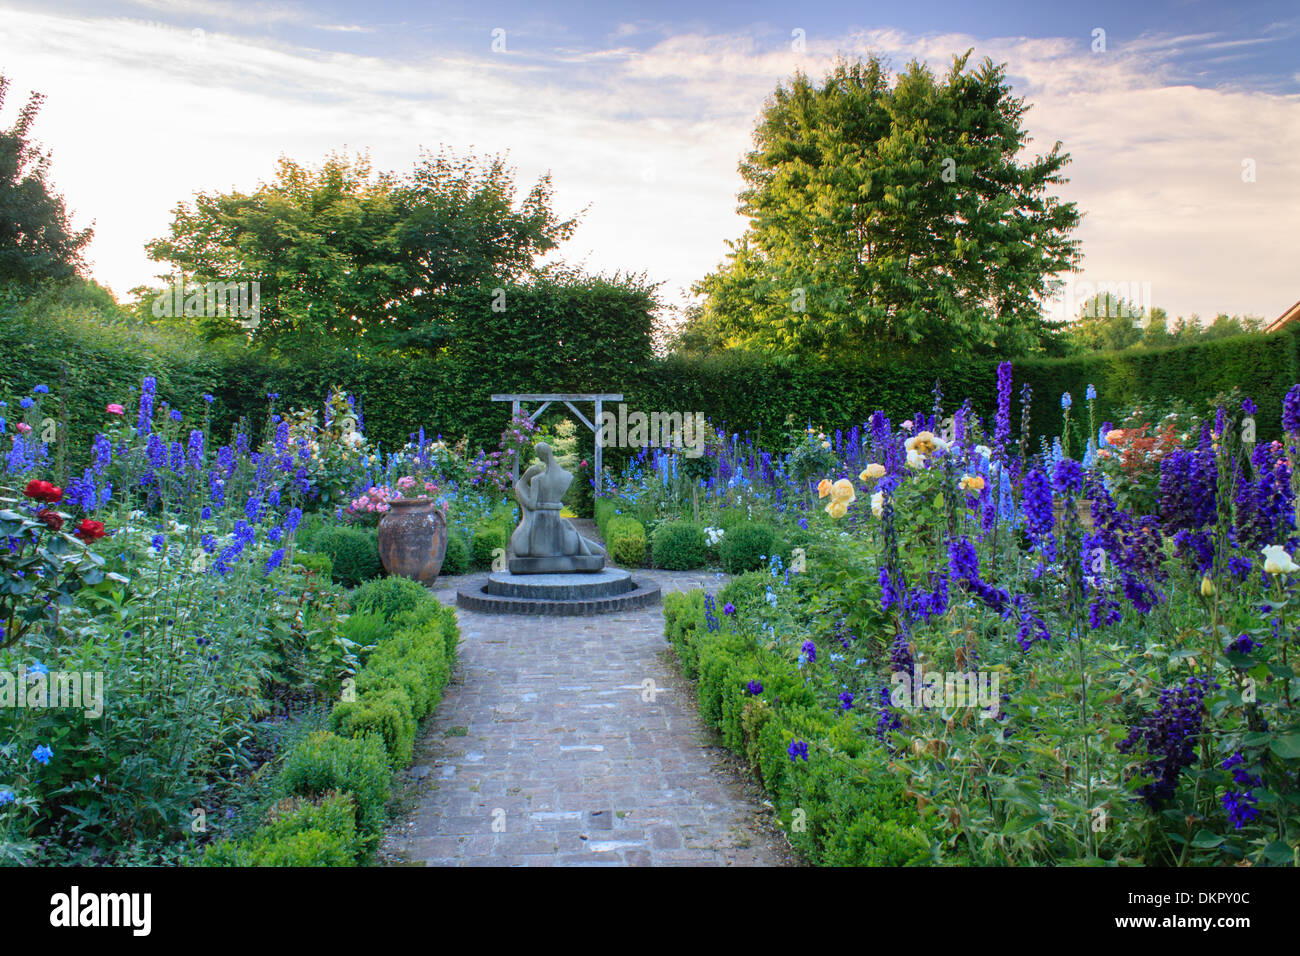 France, Calvados, Cambremer,Pays d'Auge garden, Jardin de l'amour courtois  with roses and Delphinium Stock Photo - Alamy